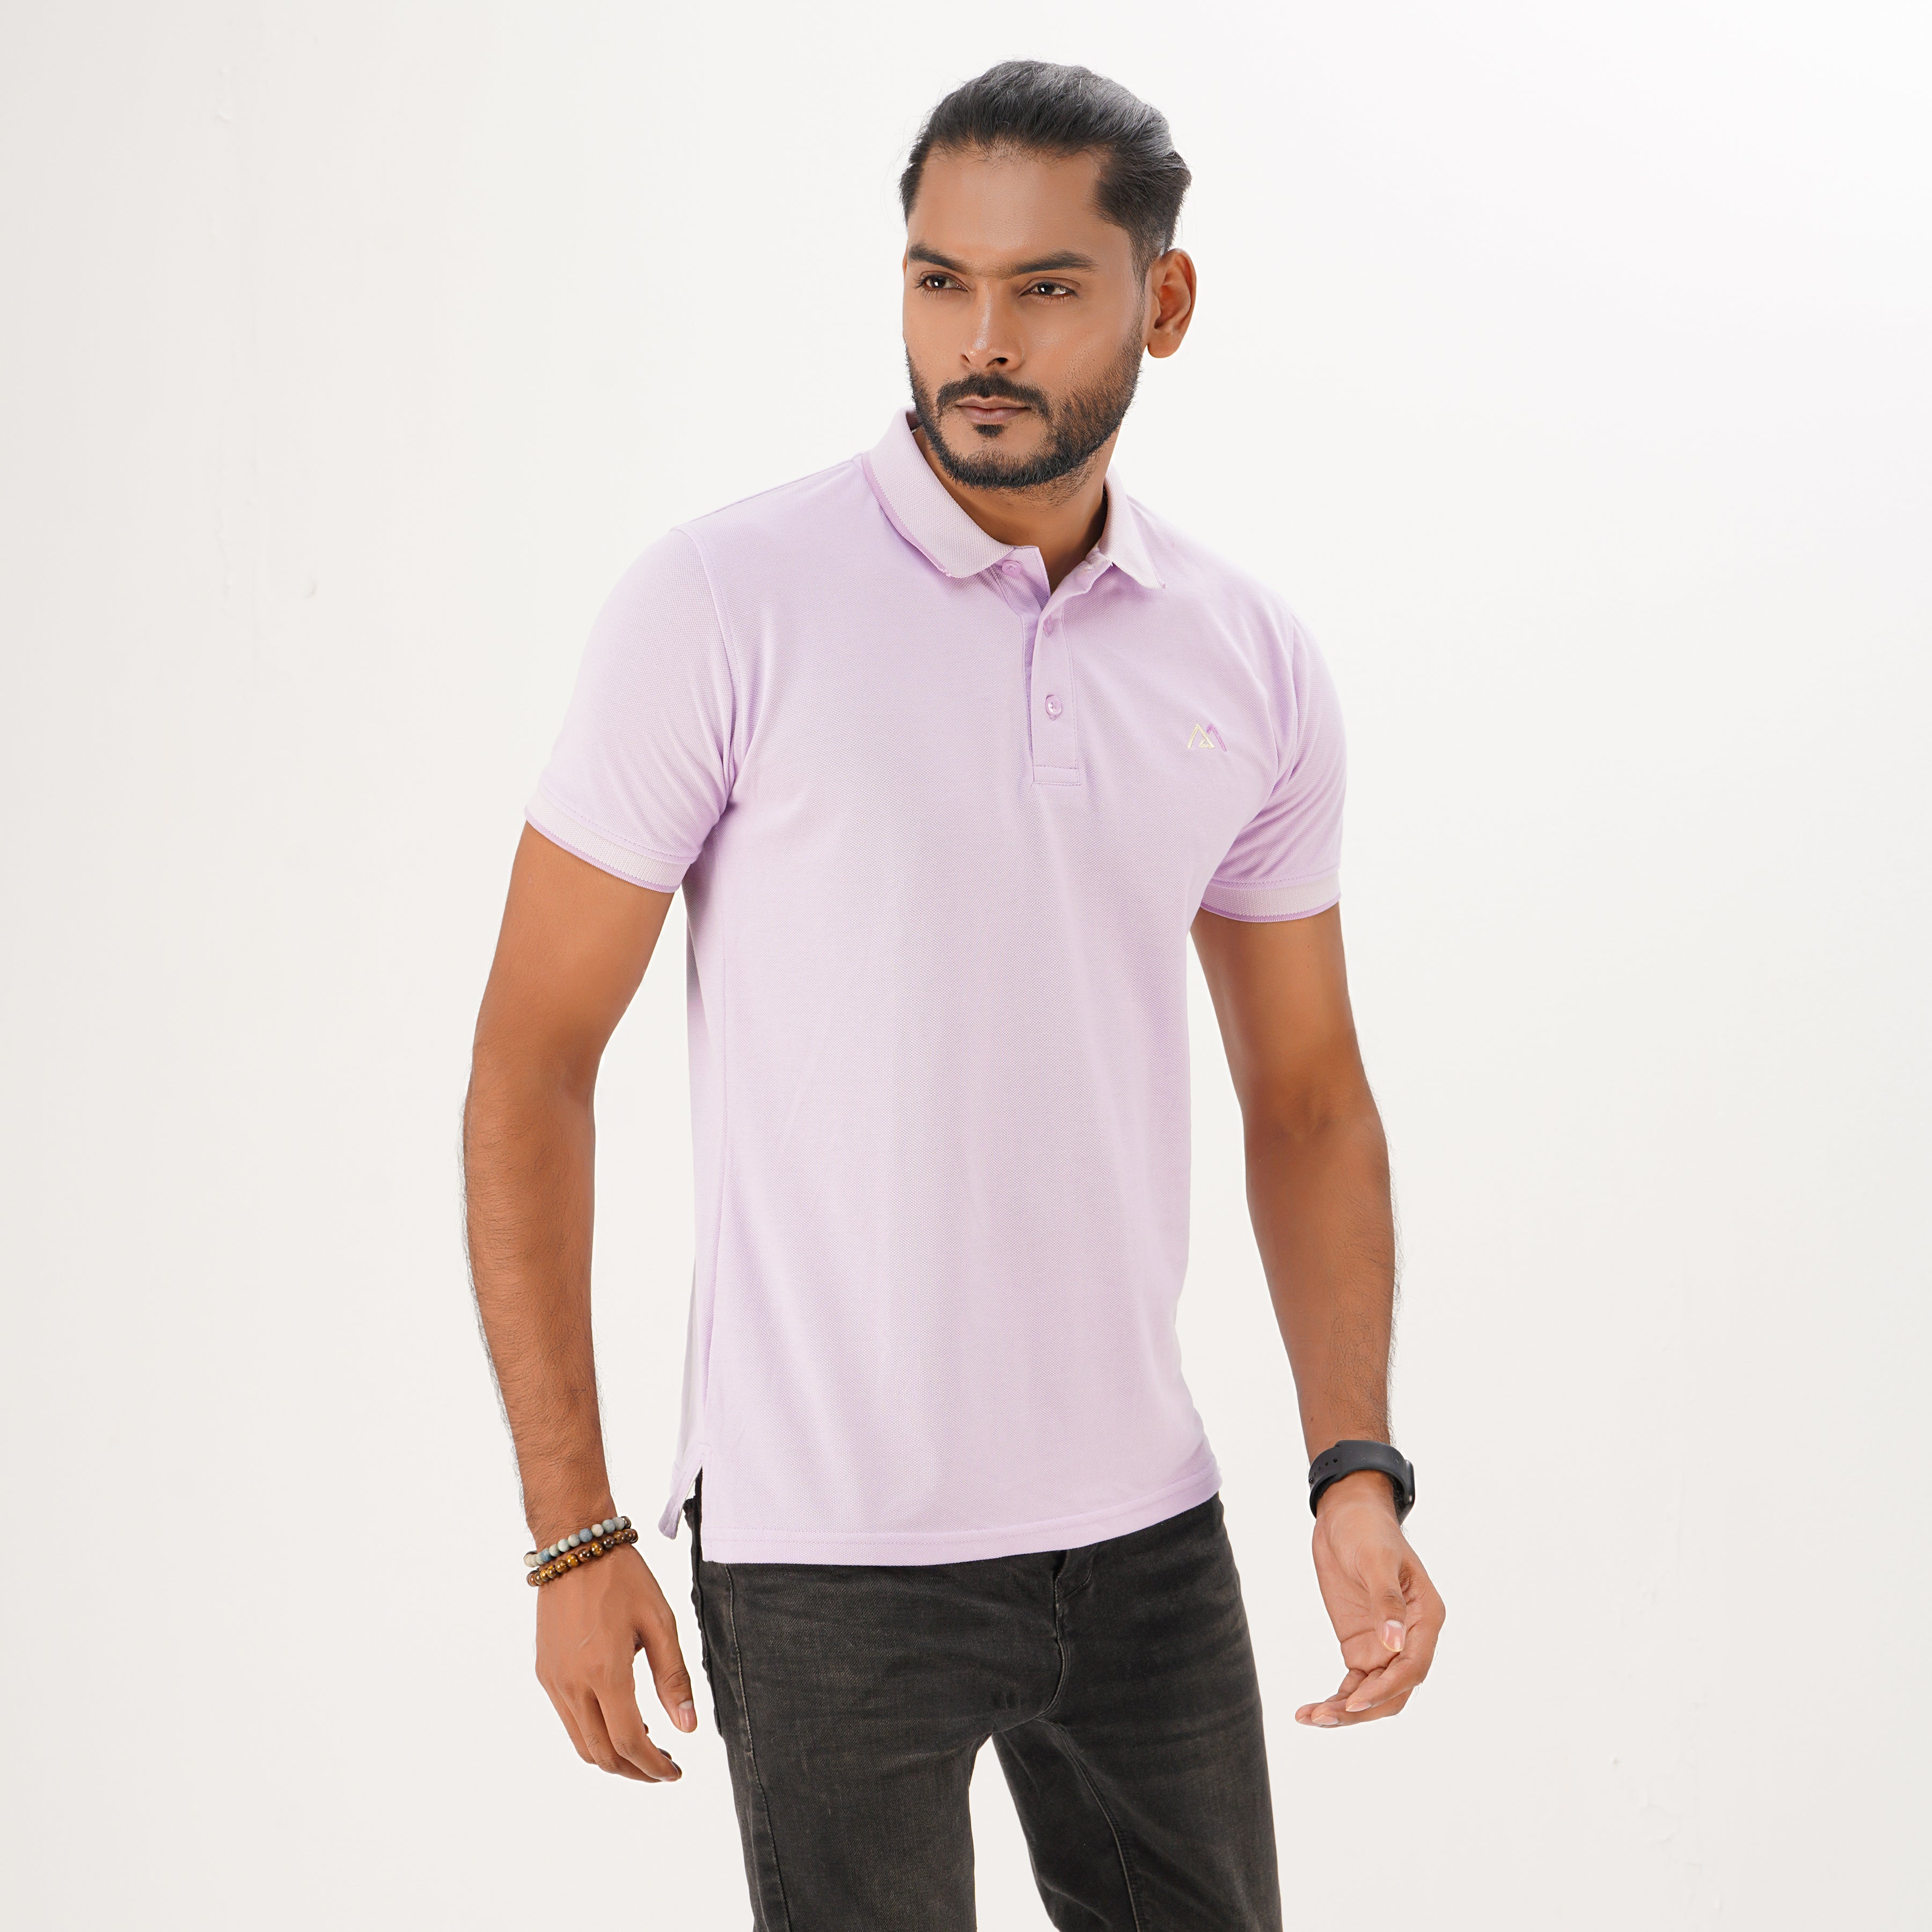 Polo Shirt for Men | Solid Light Purple Polo